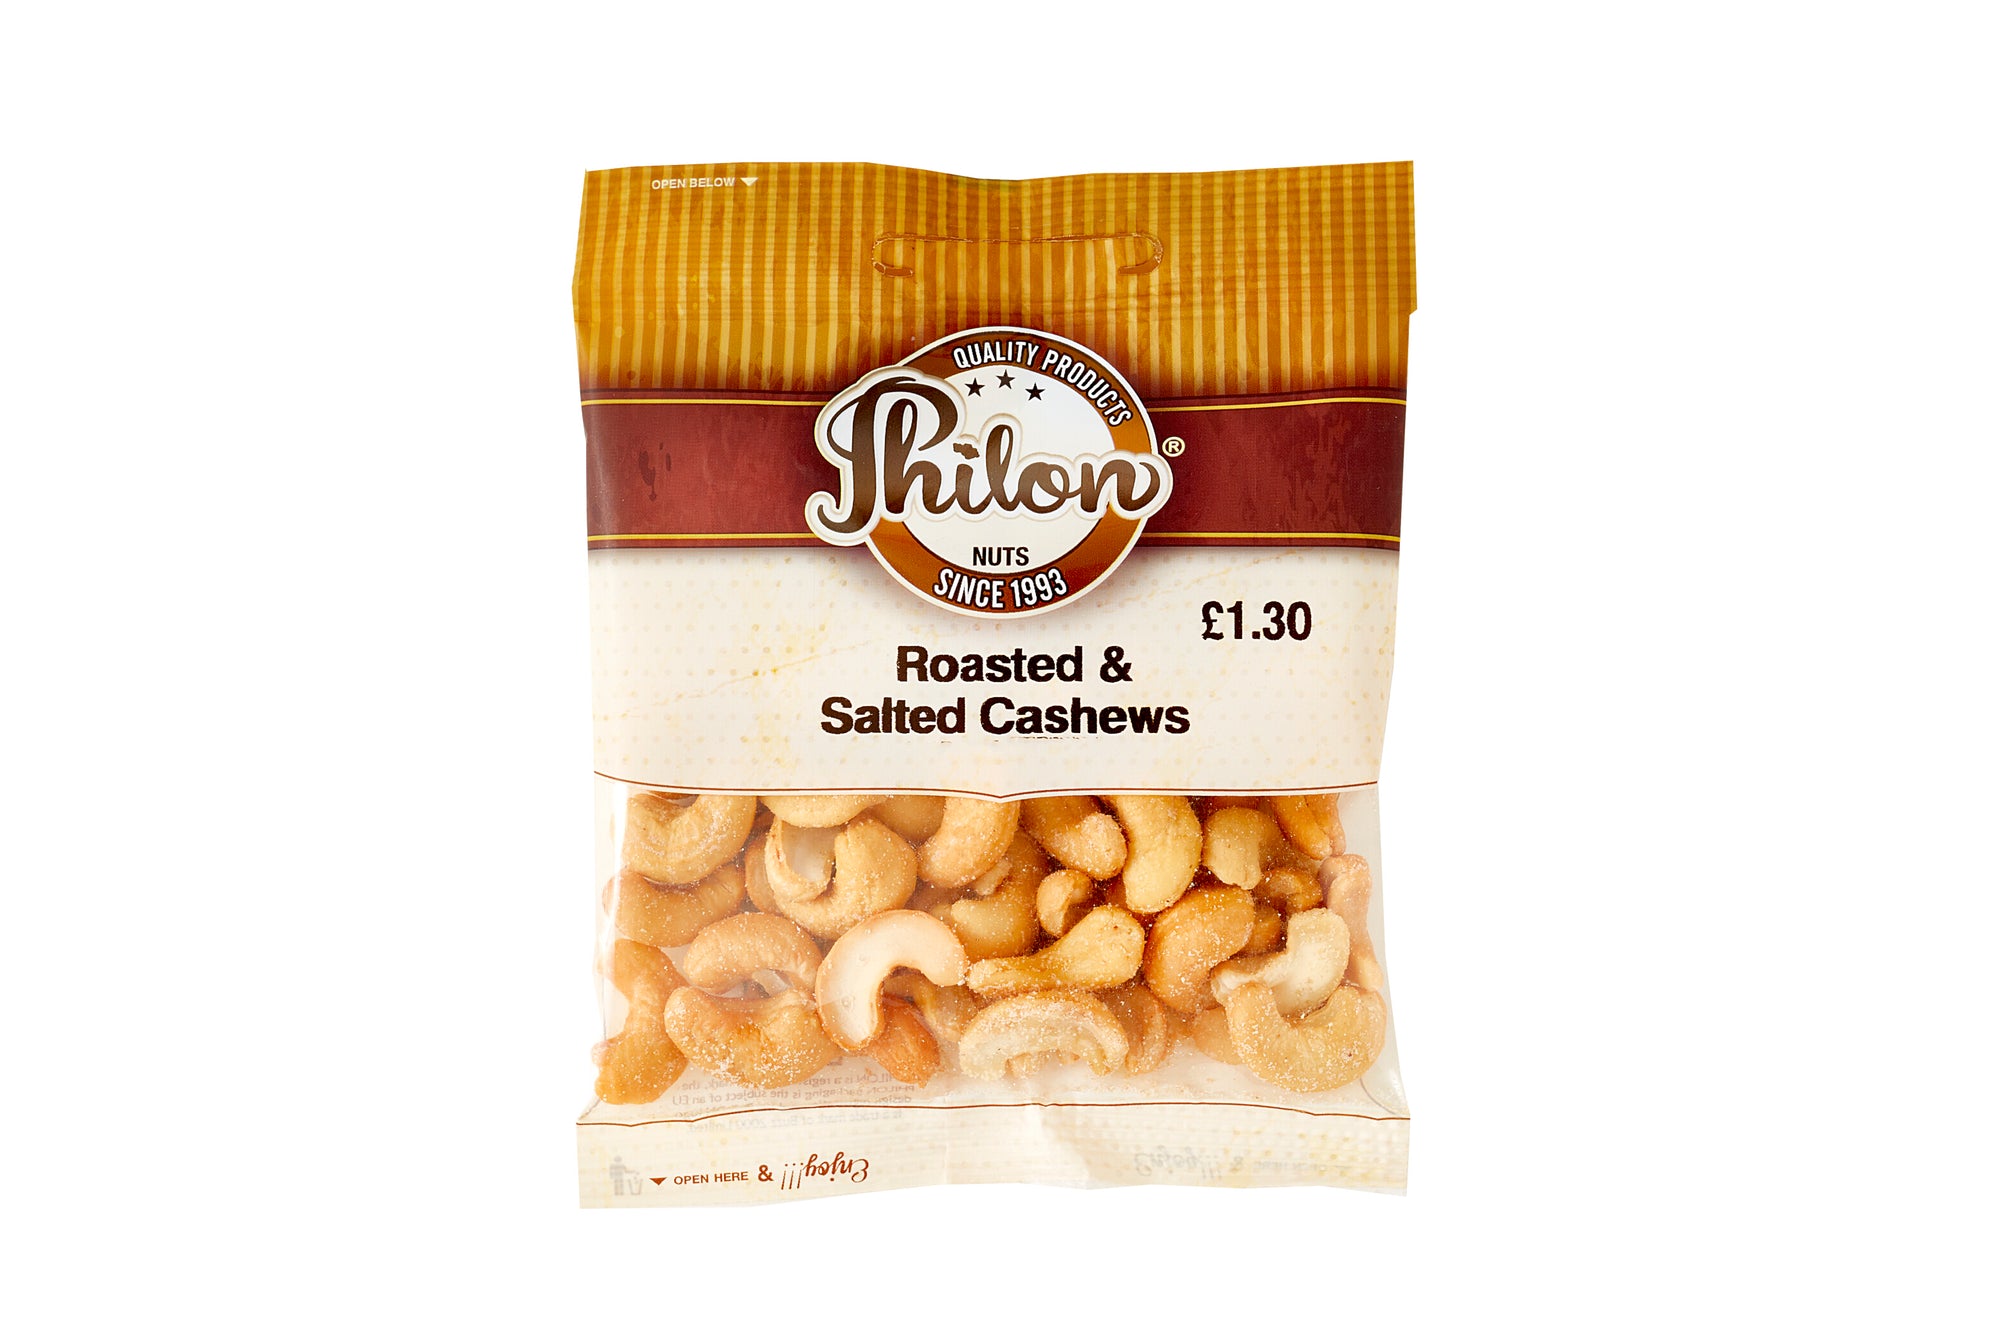 Philon Nuts Roasted & Salted Cashew